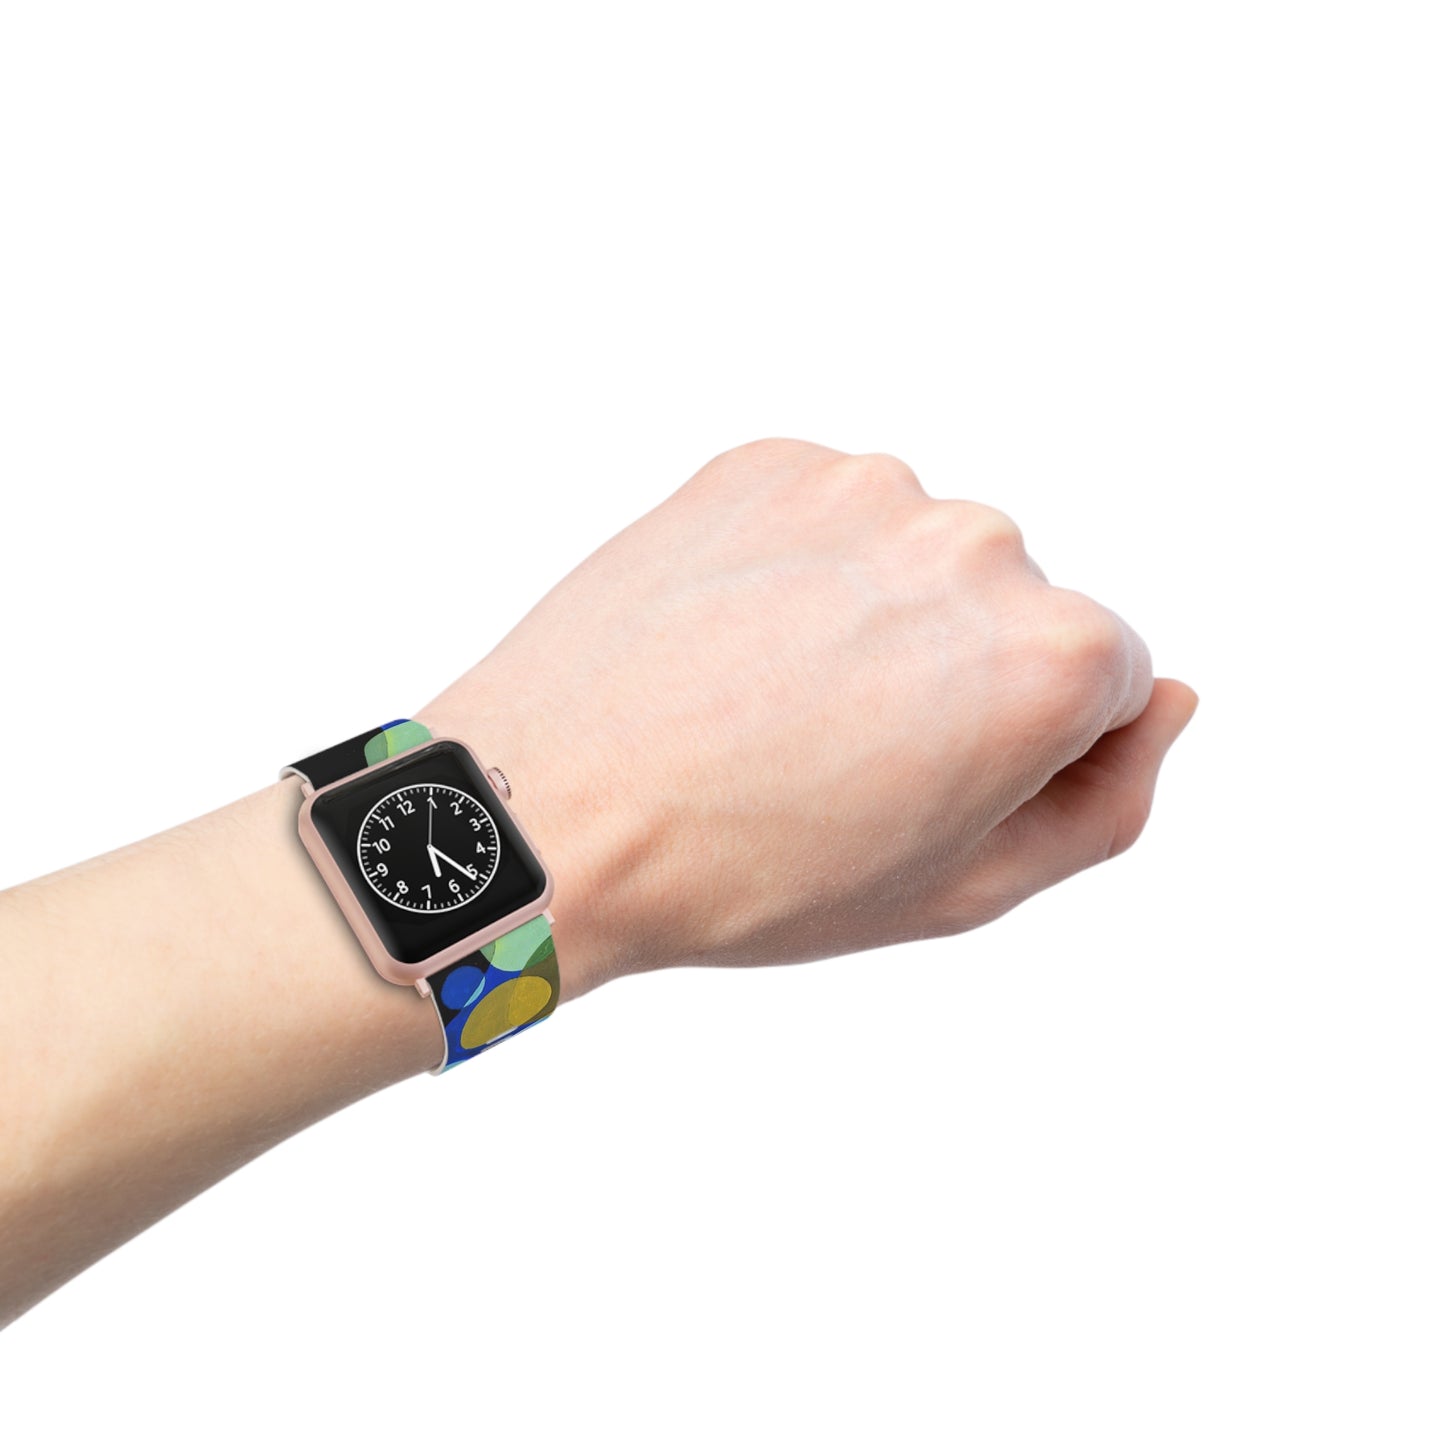 WASSILY KANDINSKY - SEVERAL CIRCLES  - ART WATCH BAND FOR APPLE WATCH